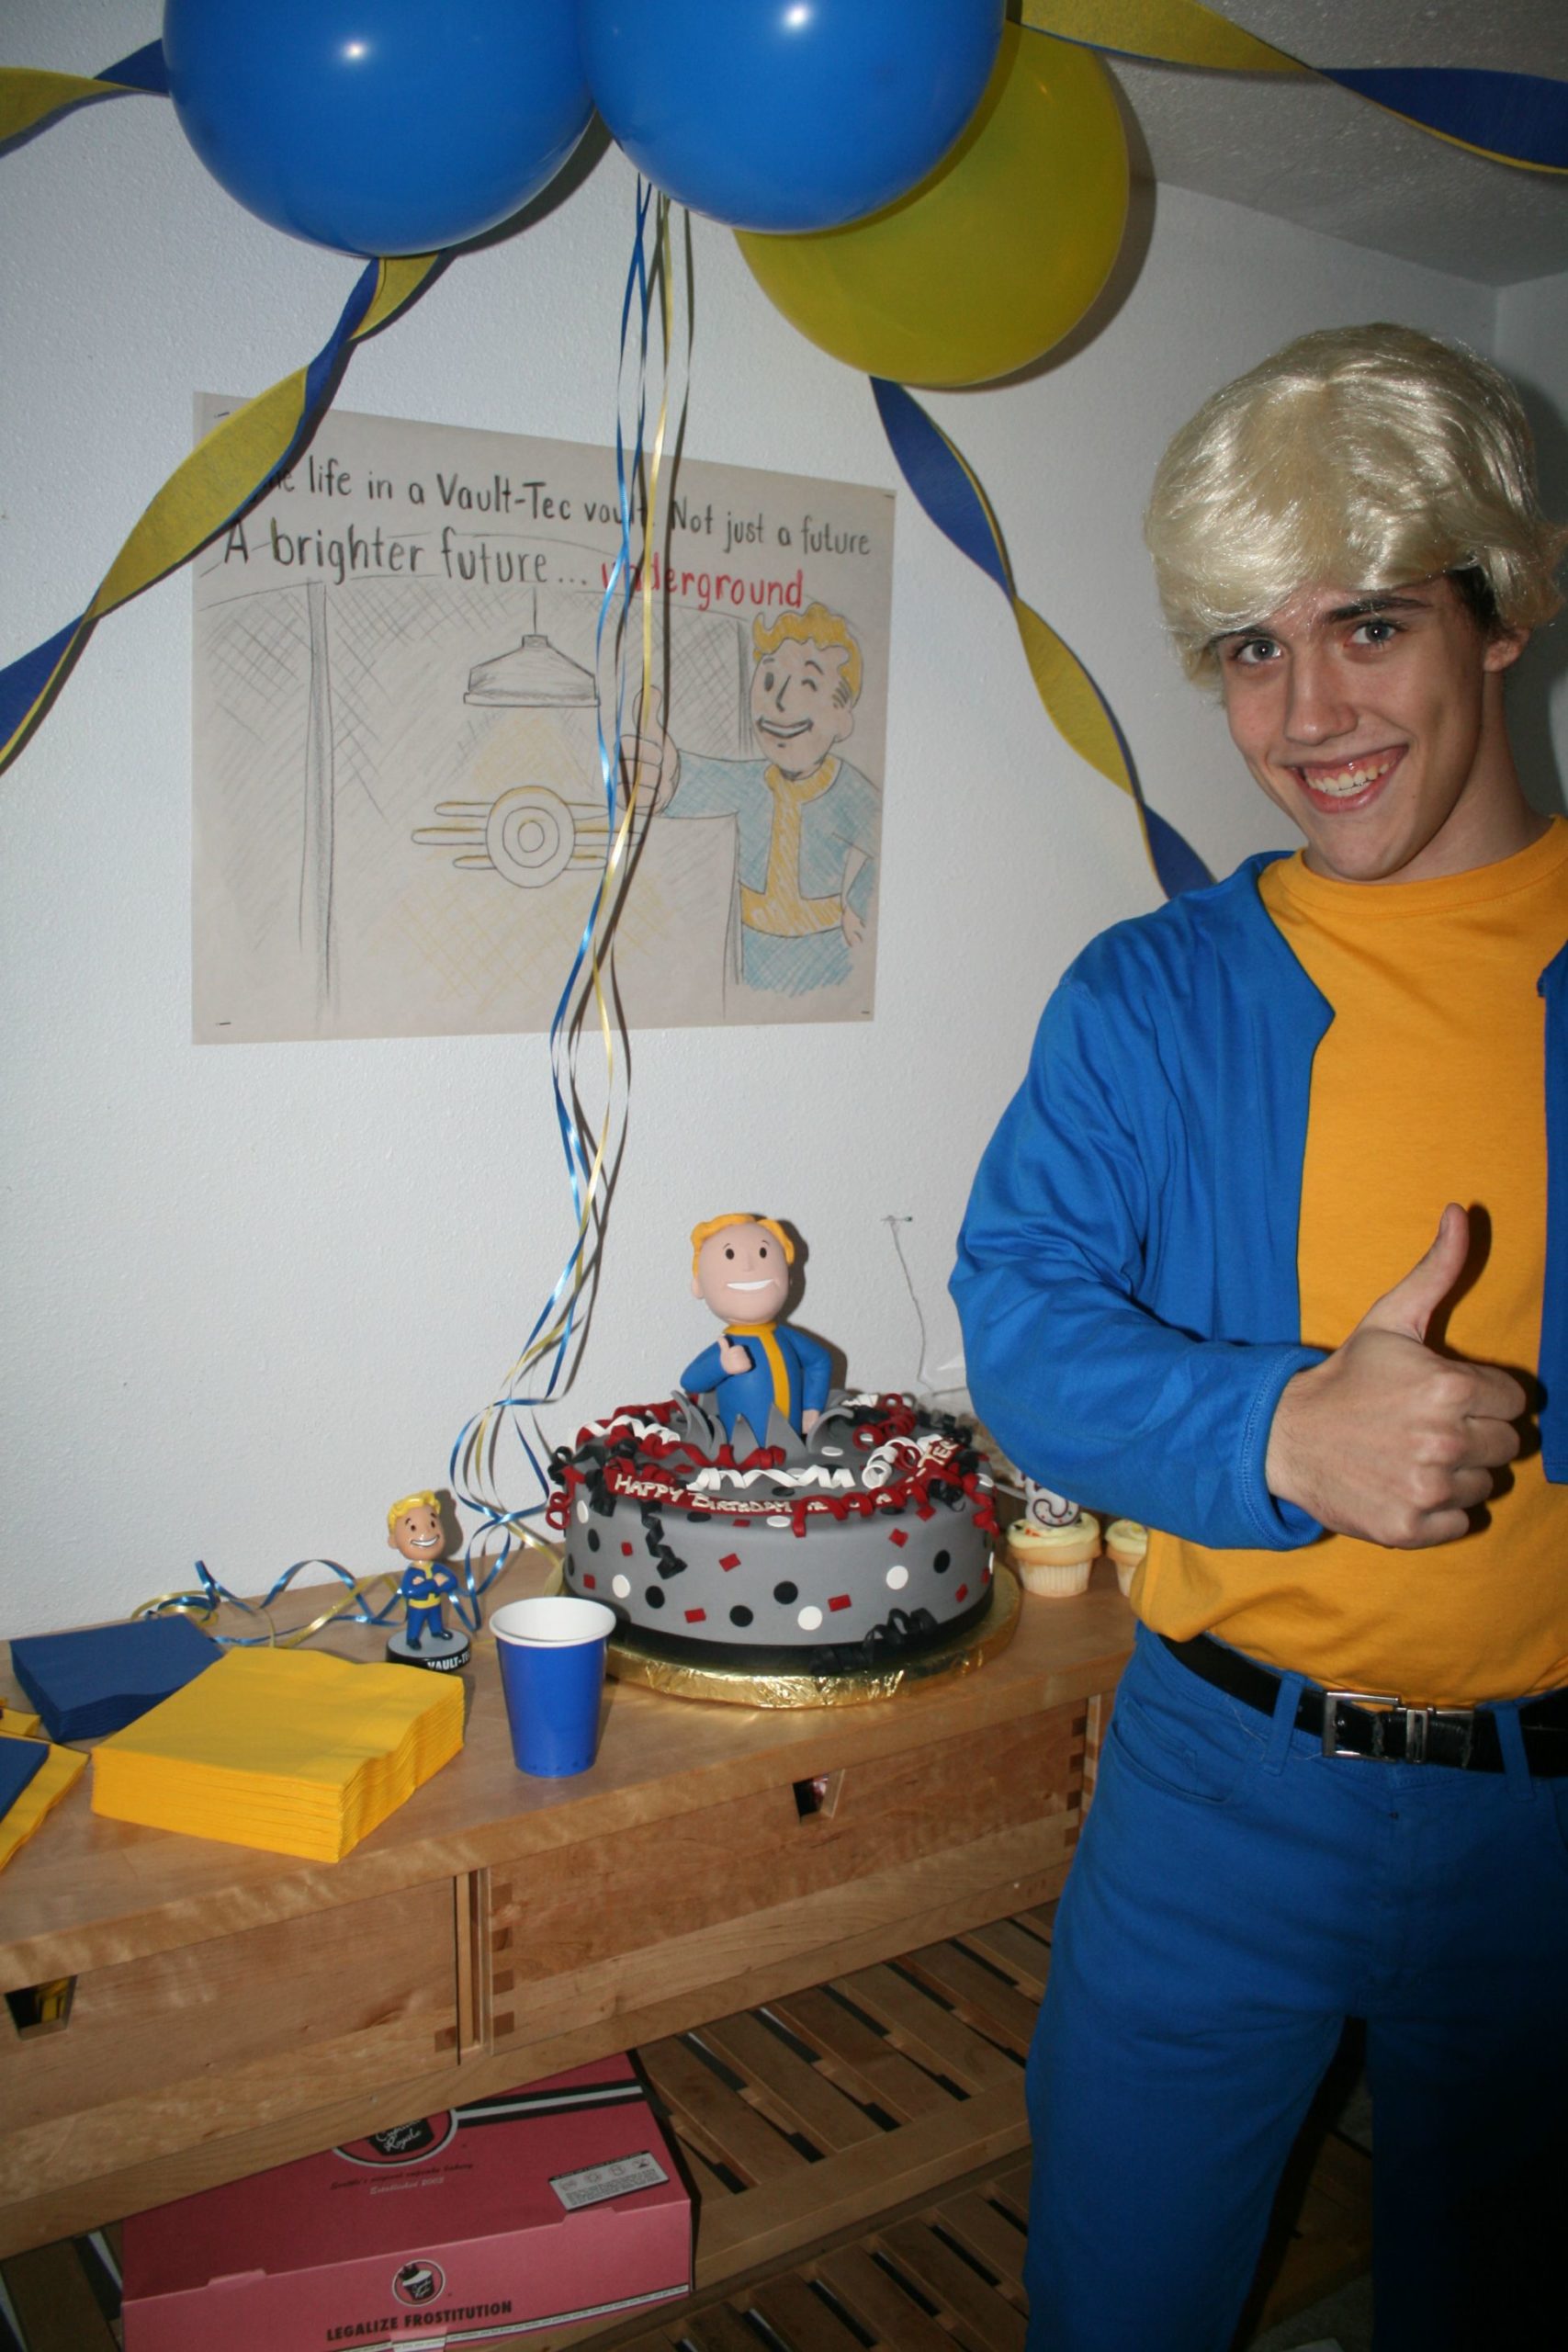 Man Turns Basement Into Fallout Vault For Birthday Party